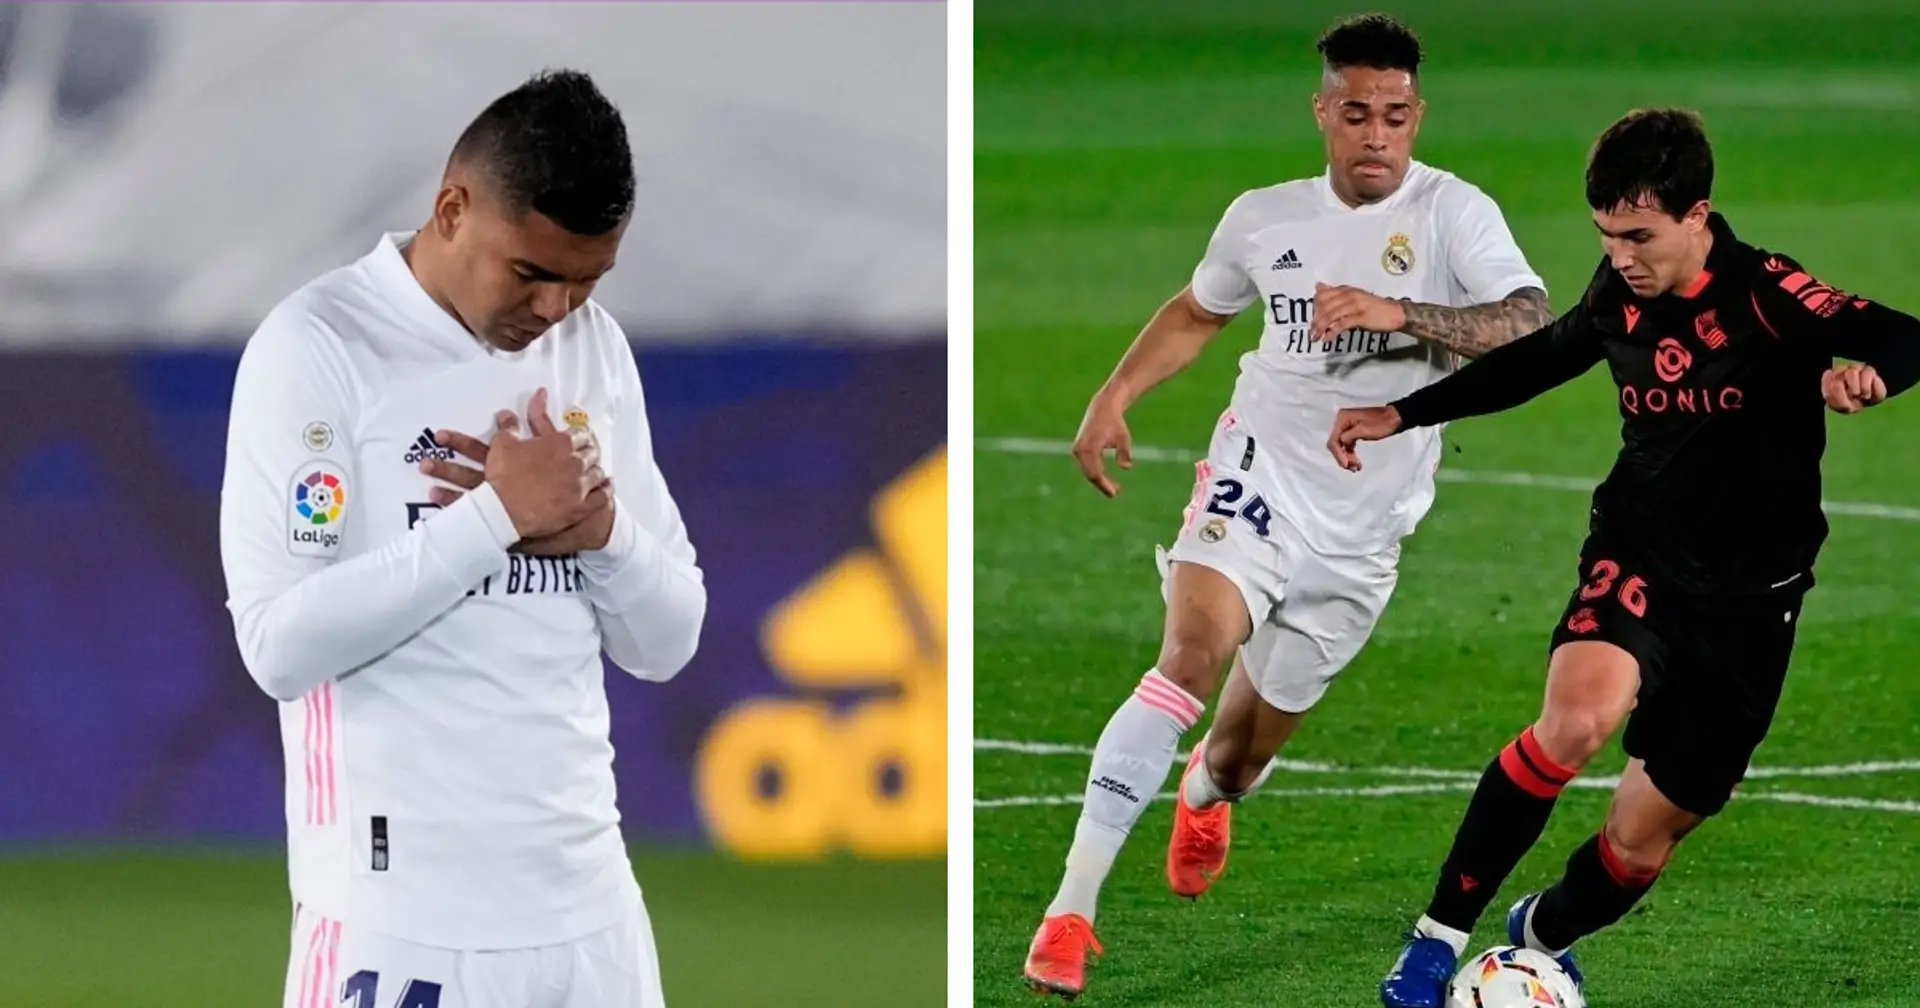 Casemiro 7.5, Asensio 2: rating Madrid players in La Real stalemate